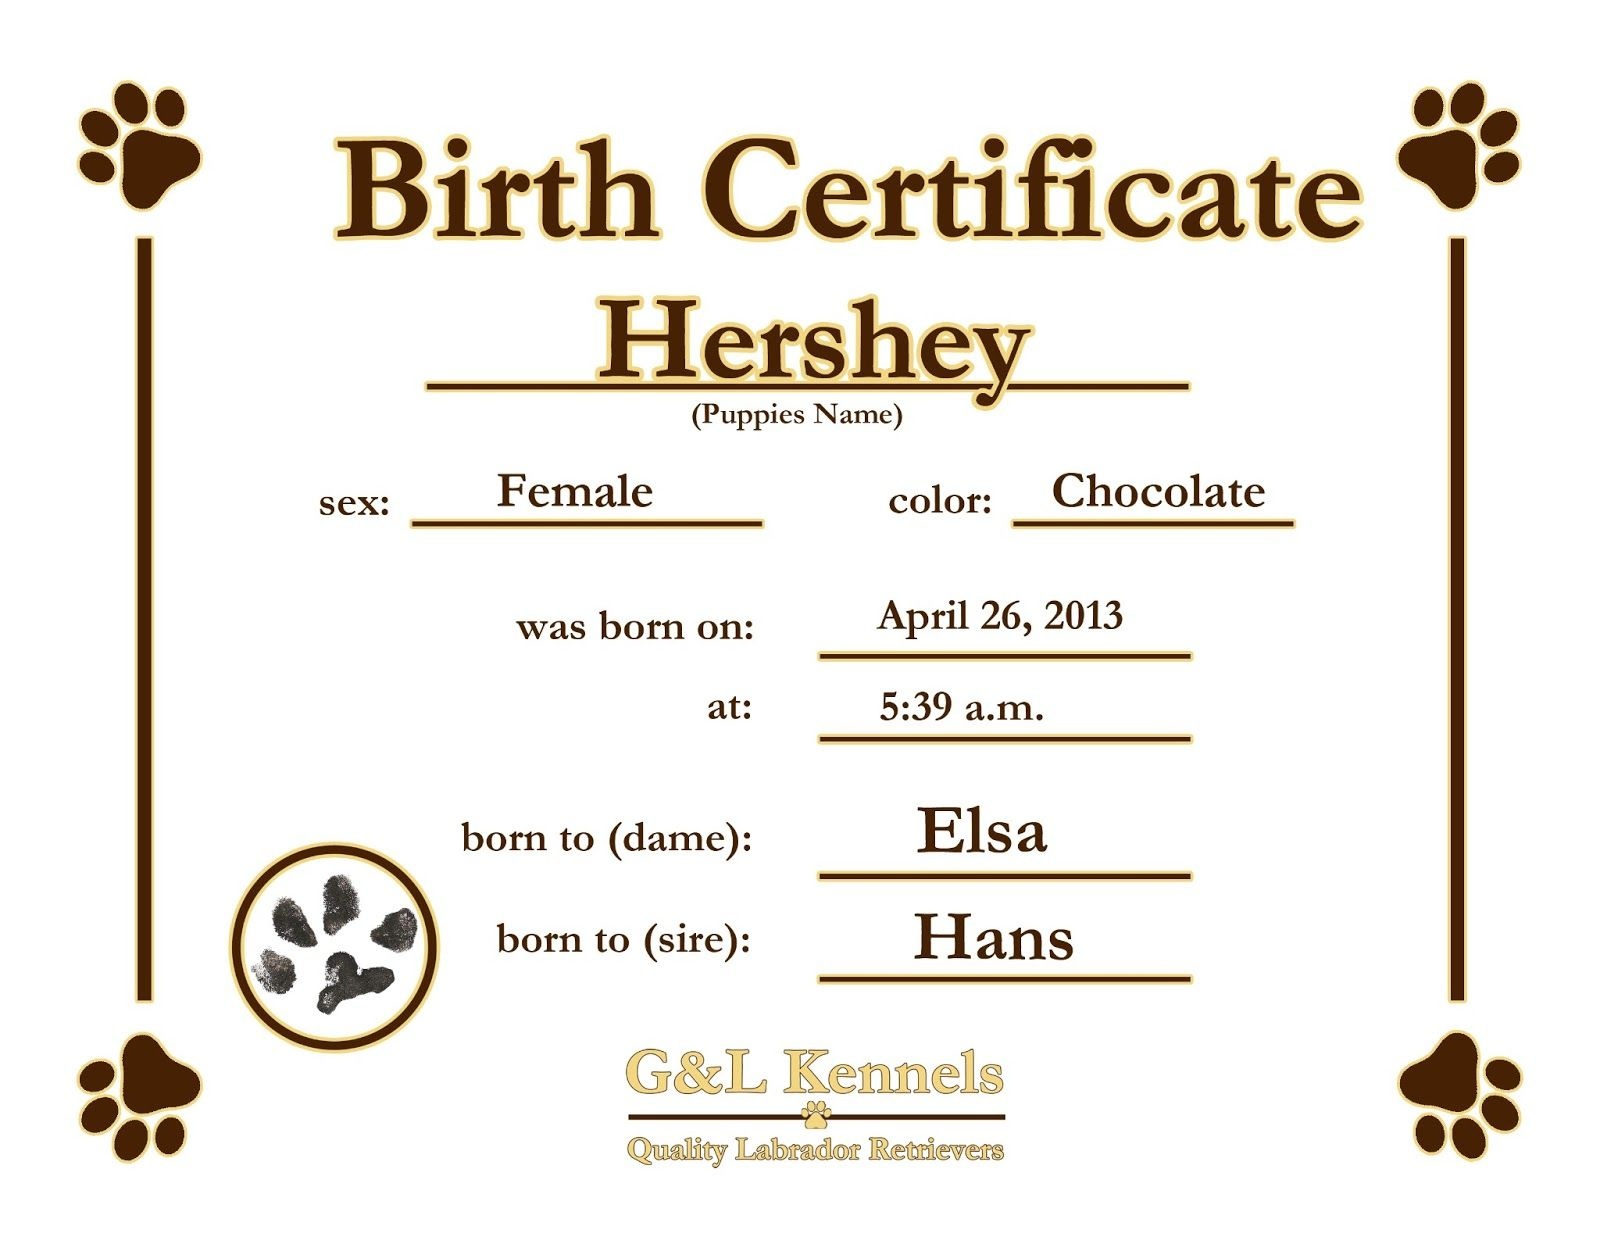 Dog Birth Certificate Template Puppy Birth Certificates | C&amp;amp;j&amp;#039;s Pup - Free Printable Birth Certificates For Puppies